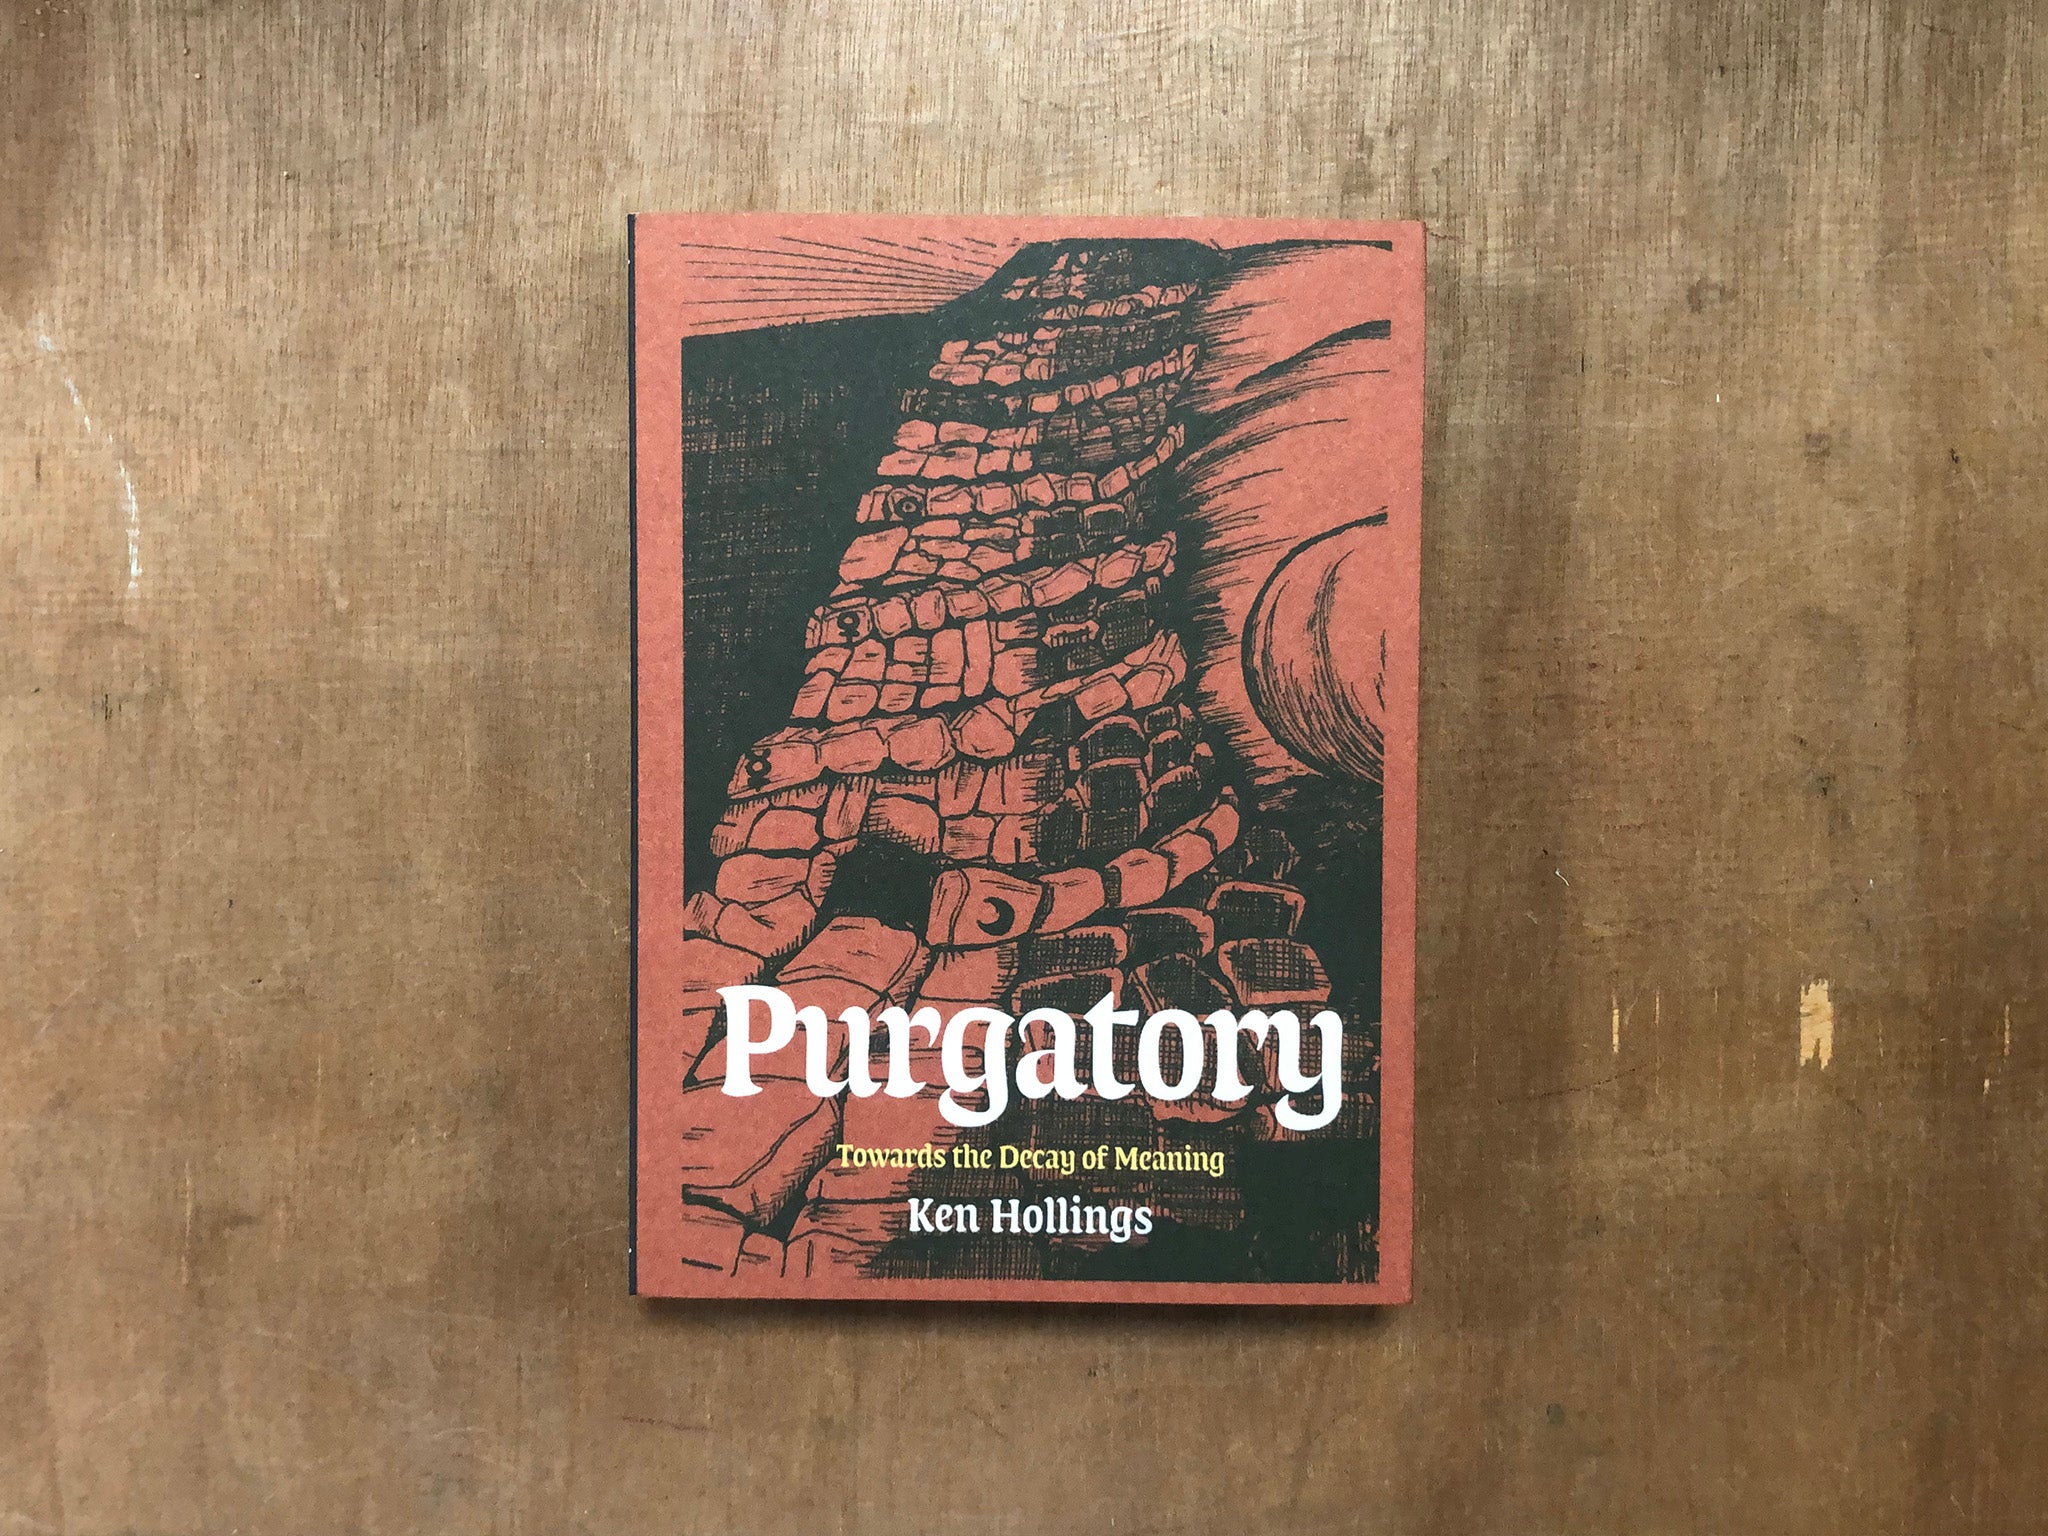 PURGATORY, TOWARDS THE DECAY OF MEANING by Ken Hollings